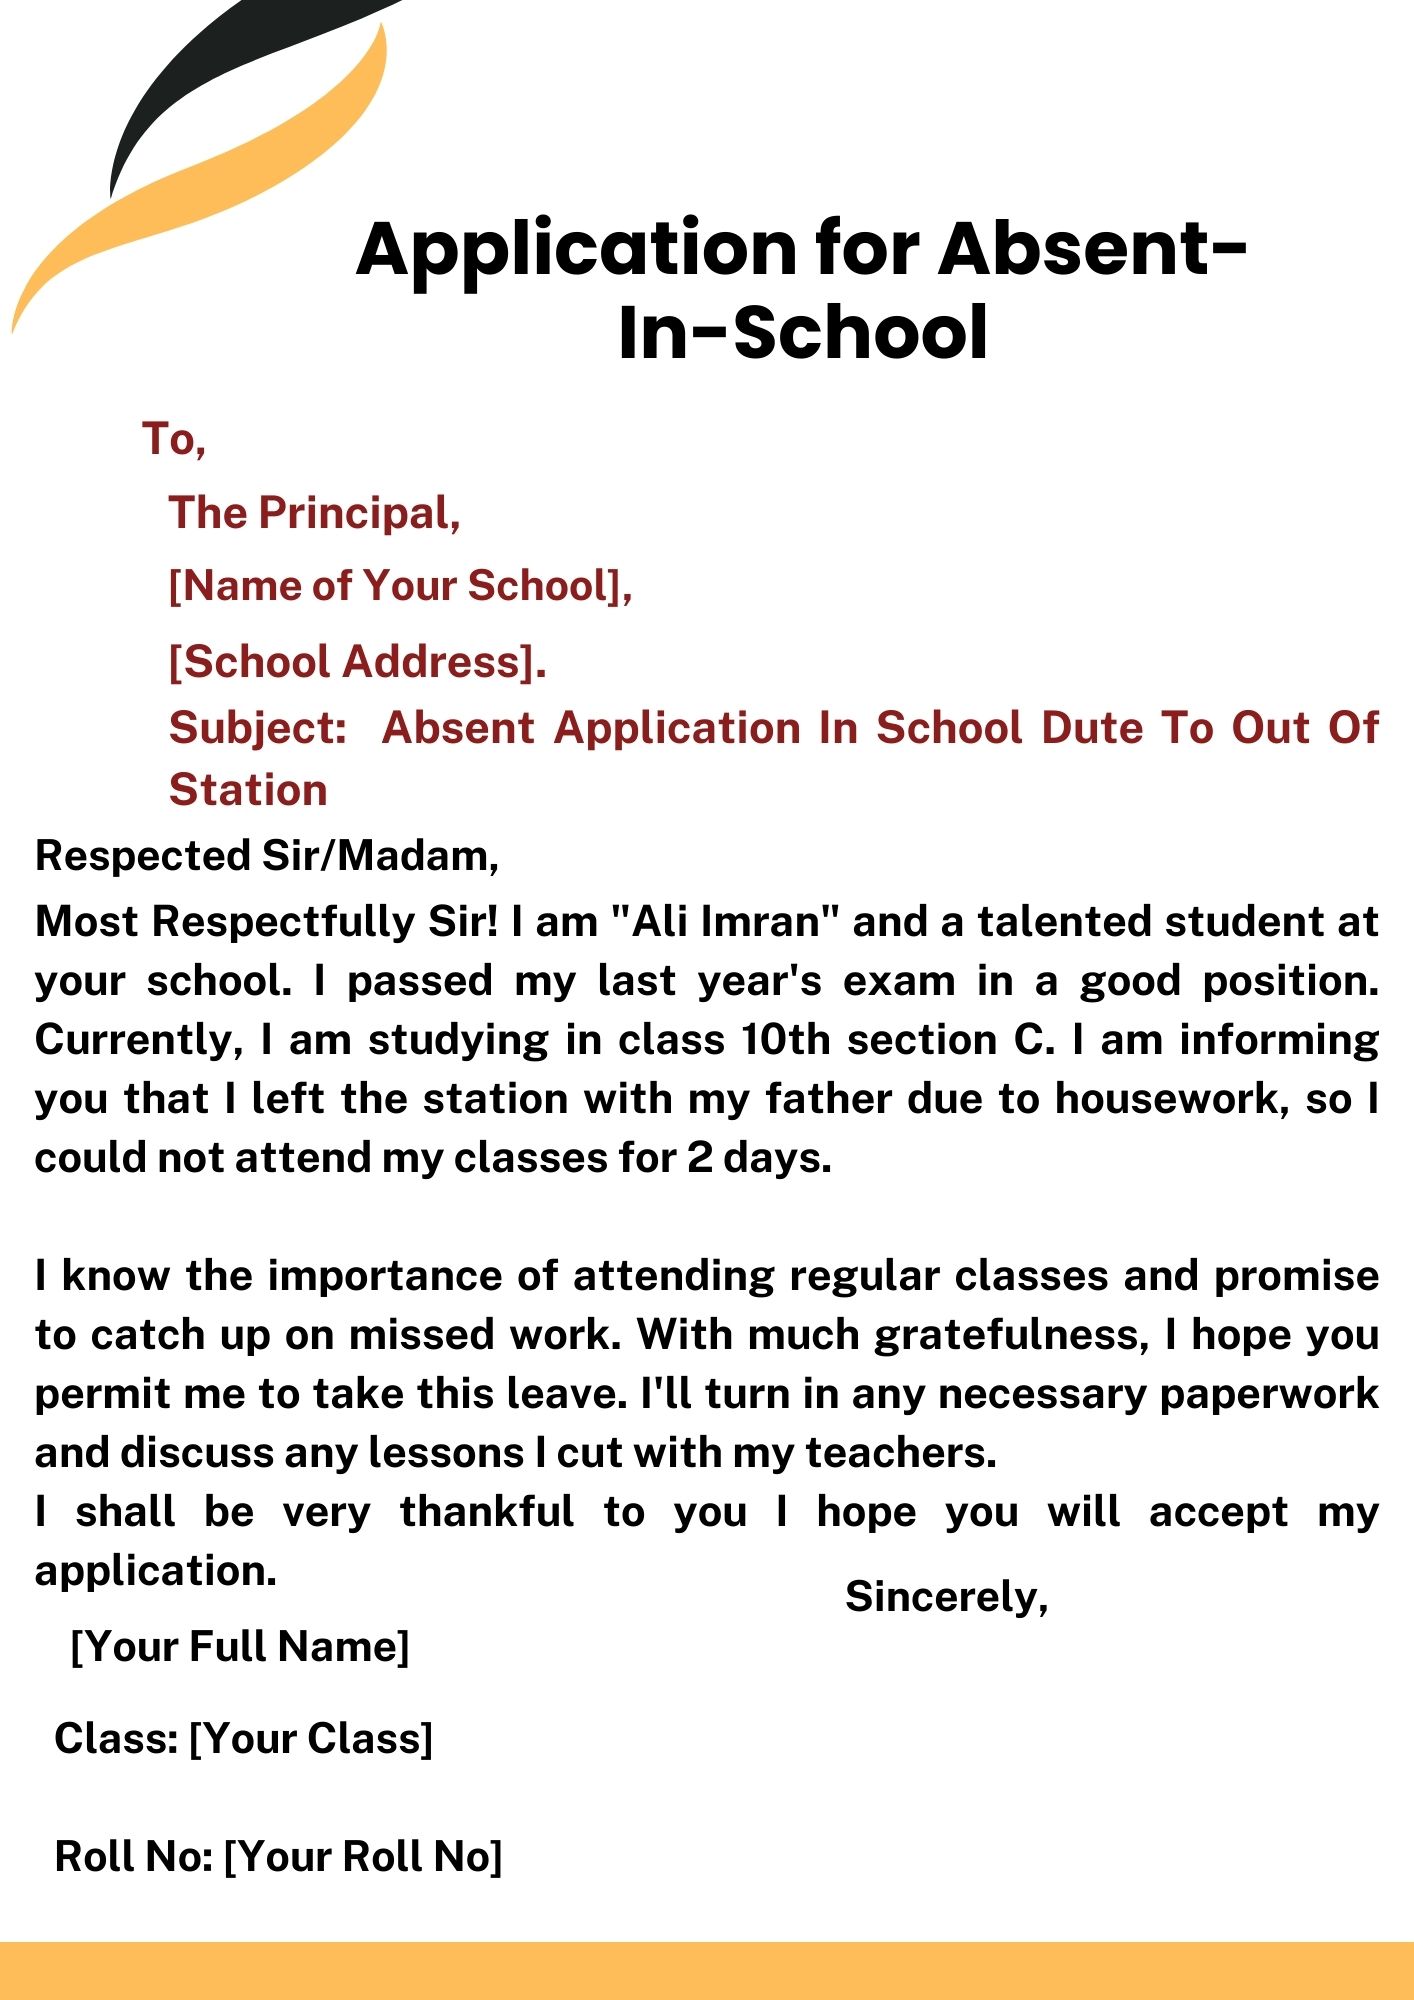 Absent Application In School Due To Out Of Station